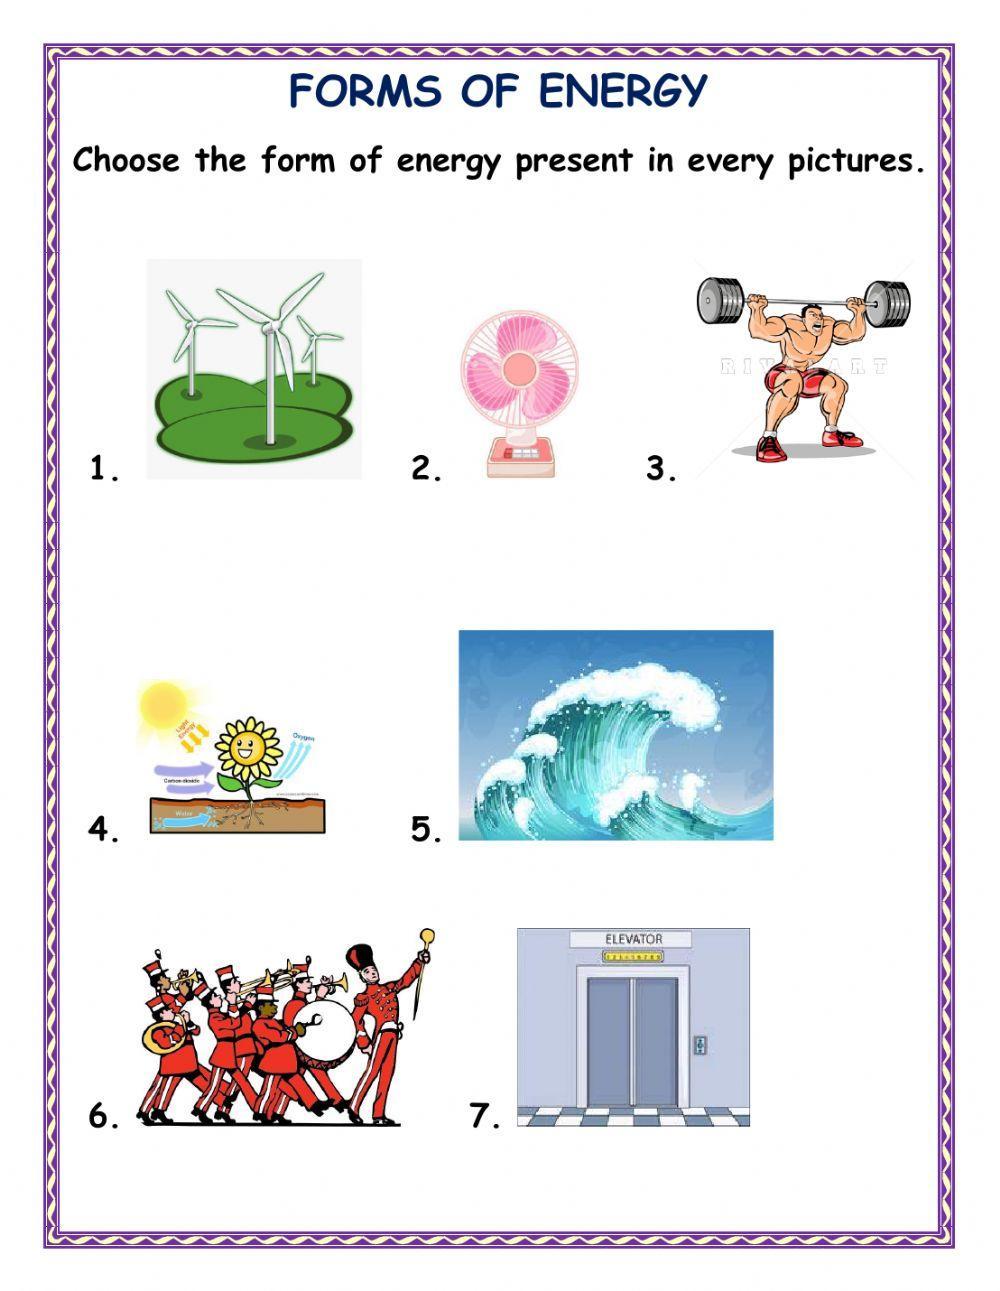 Forms of energy